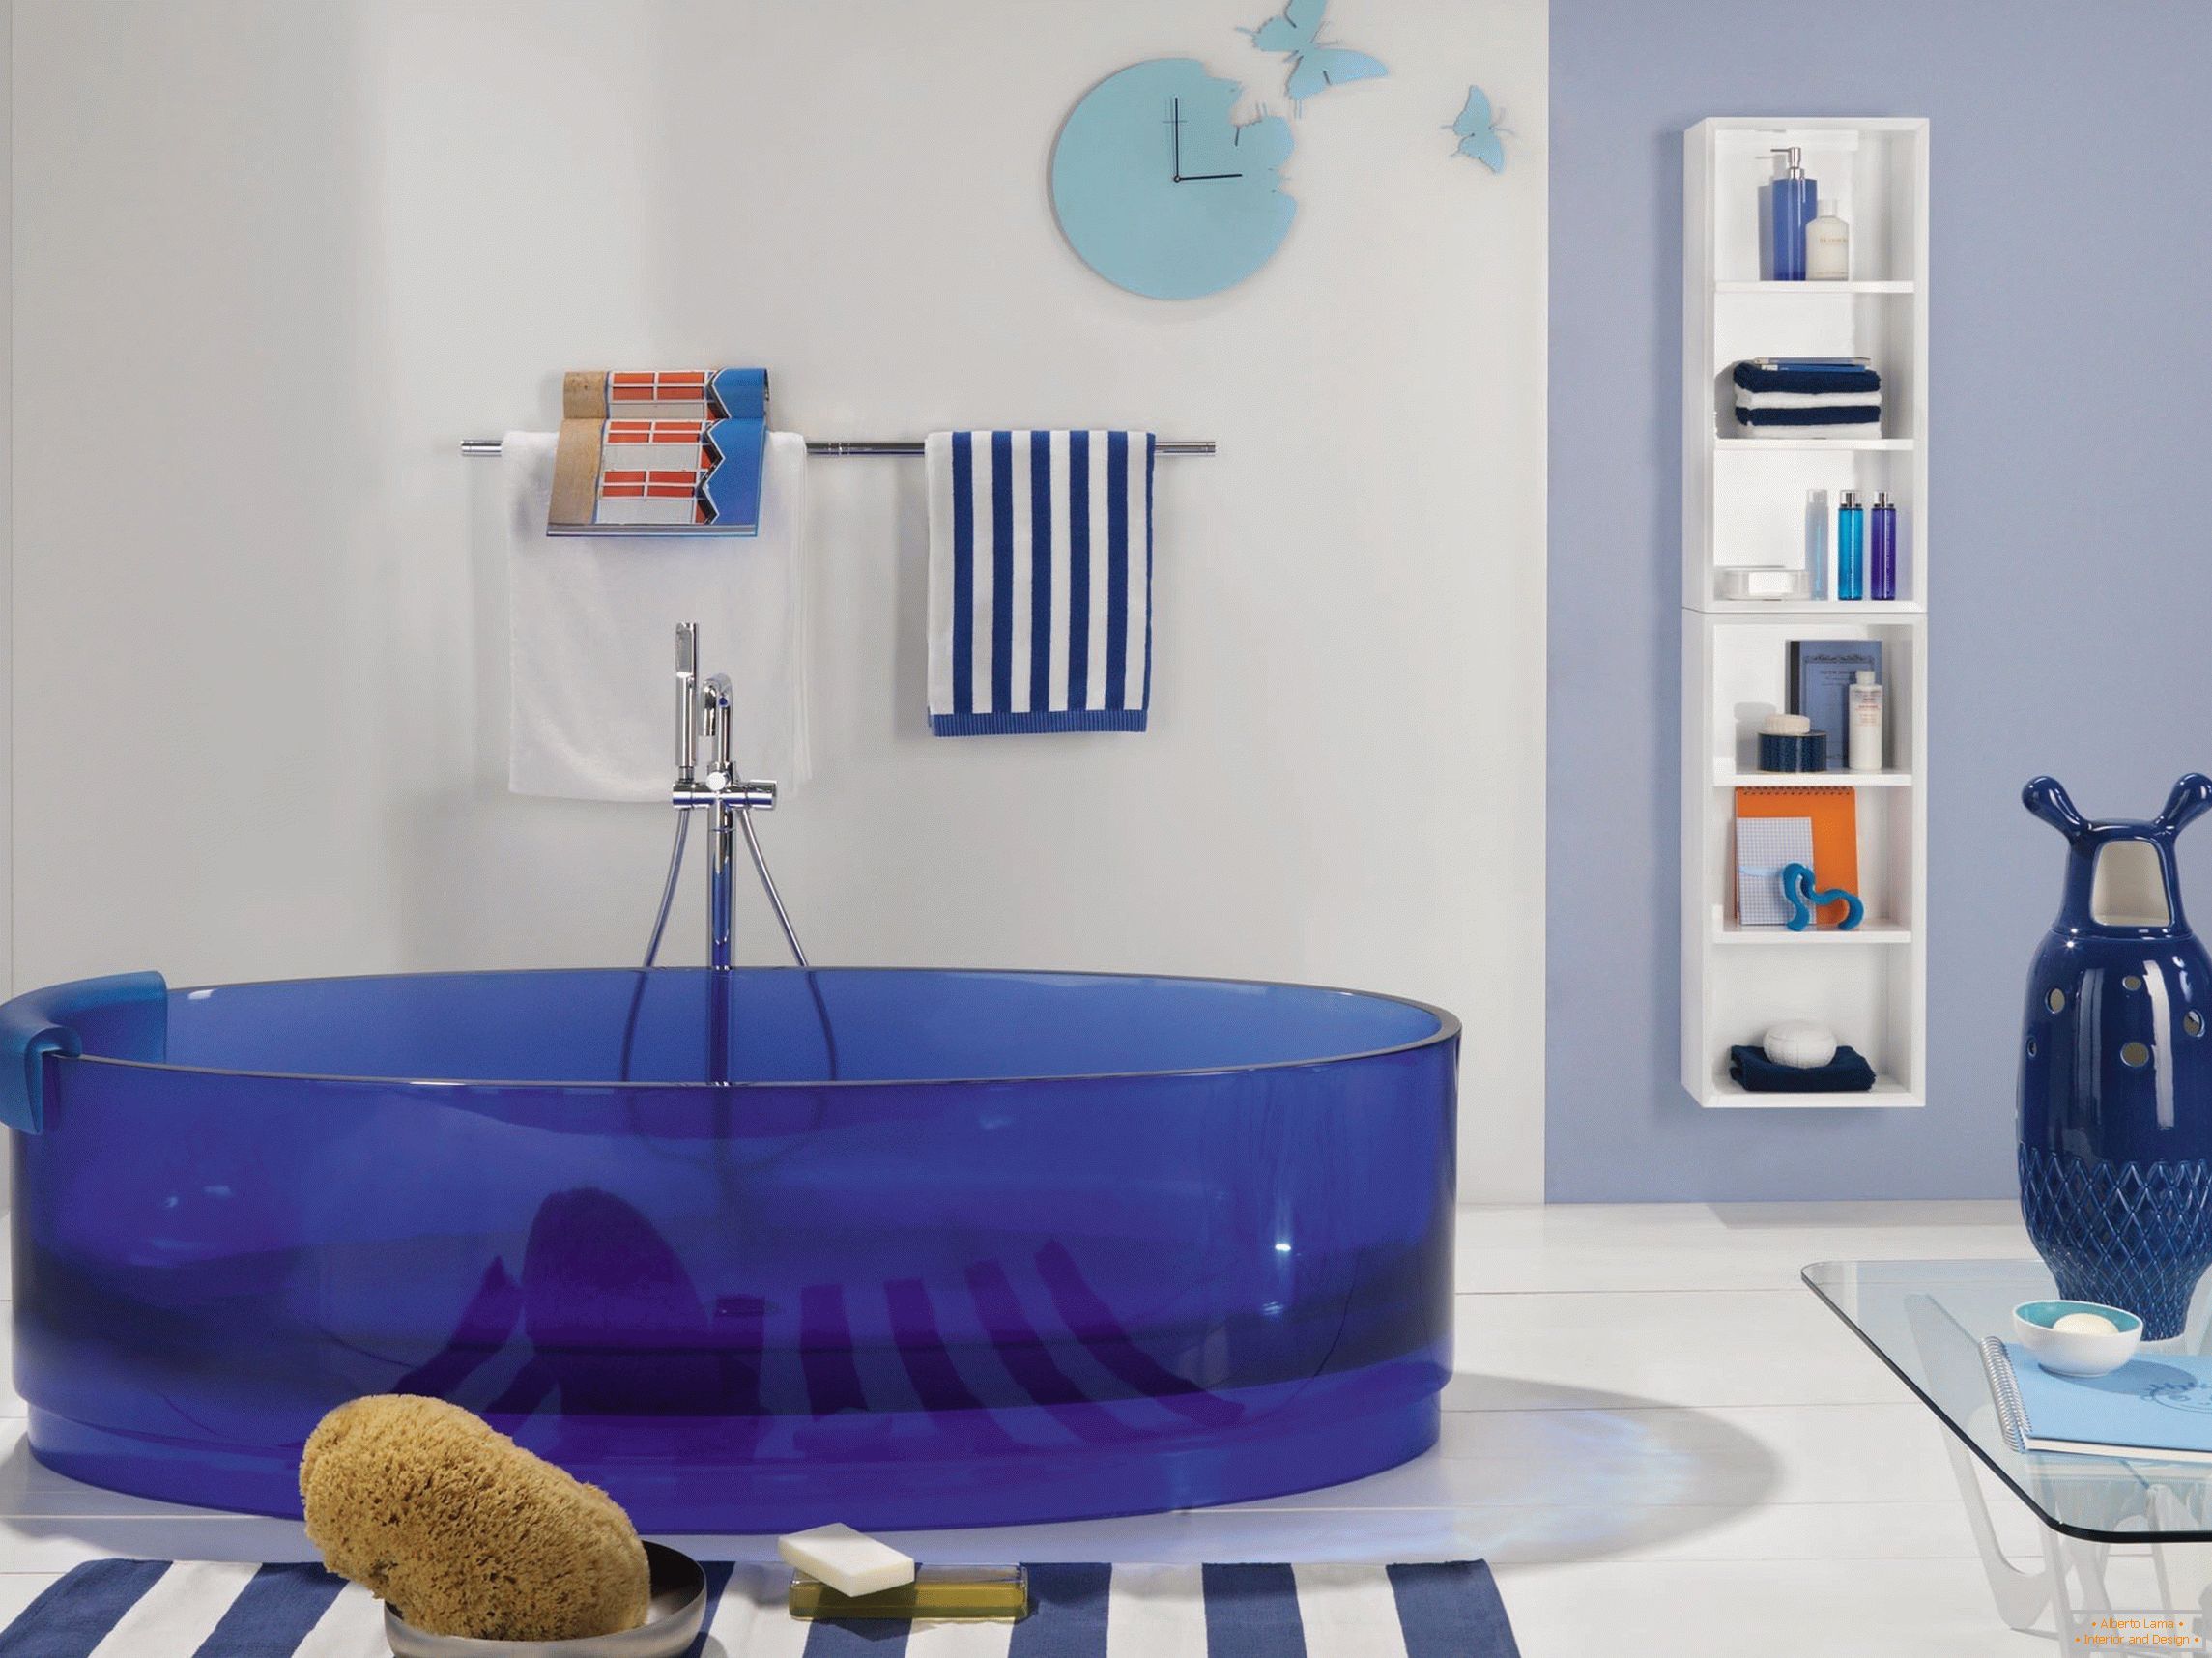 Bath in blue colors